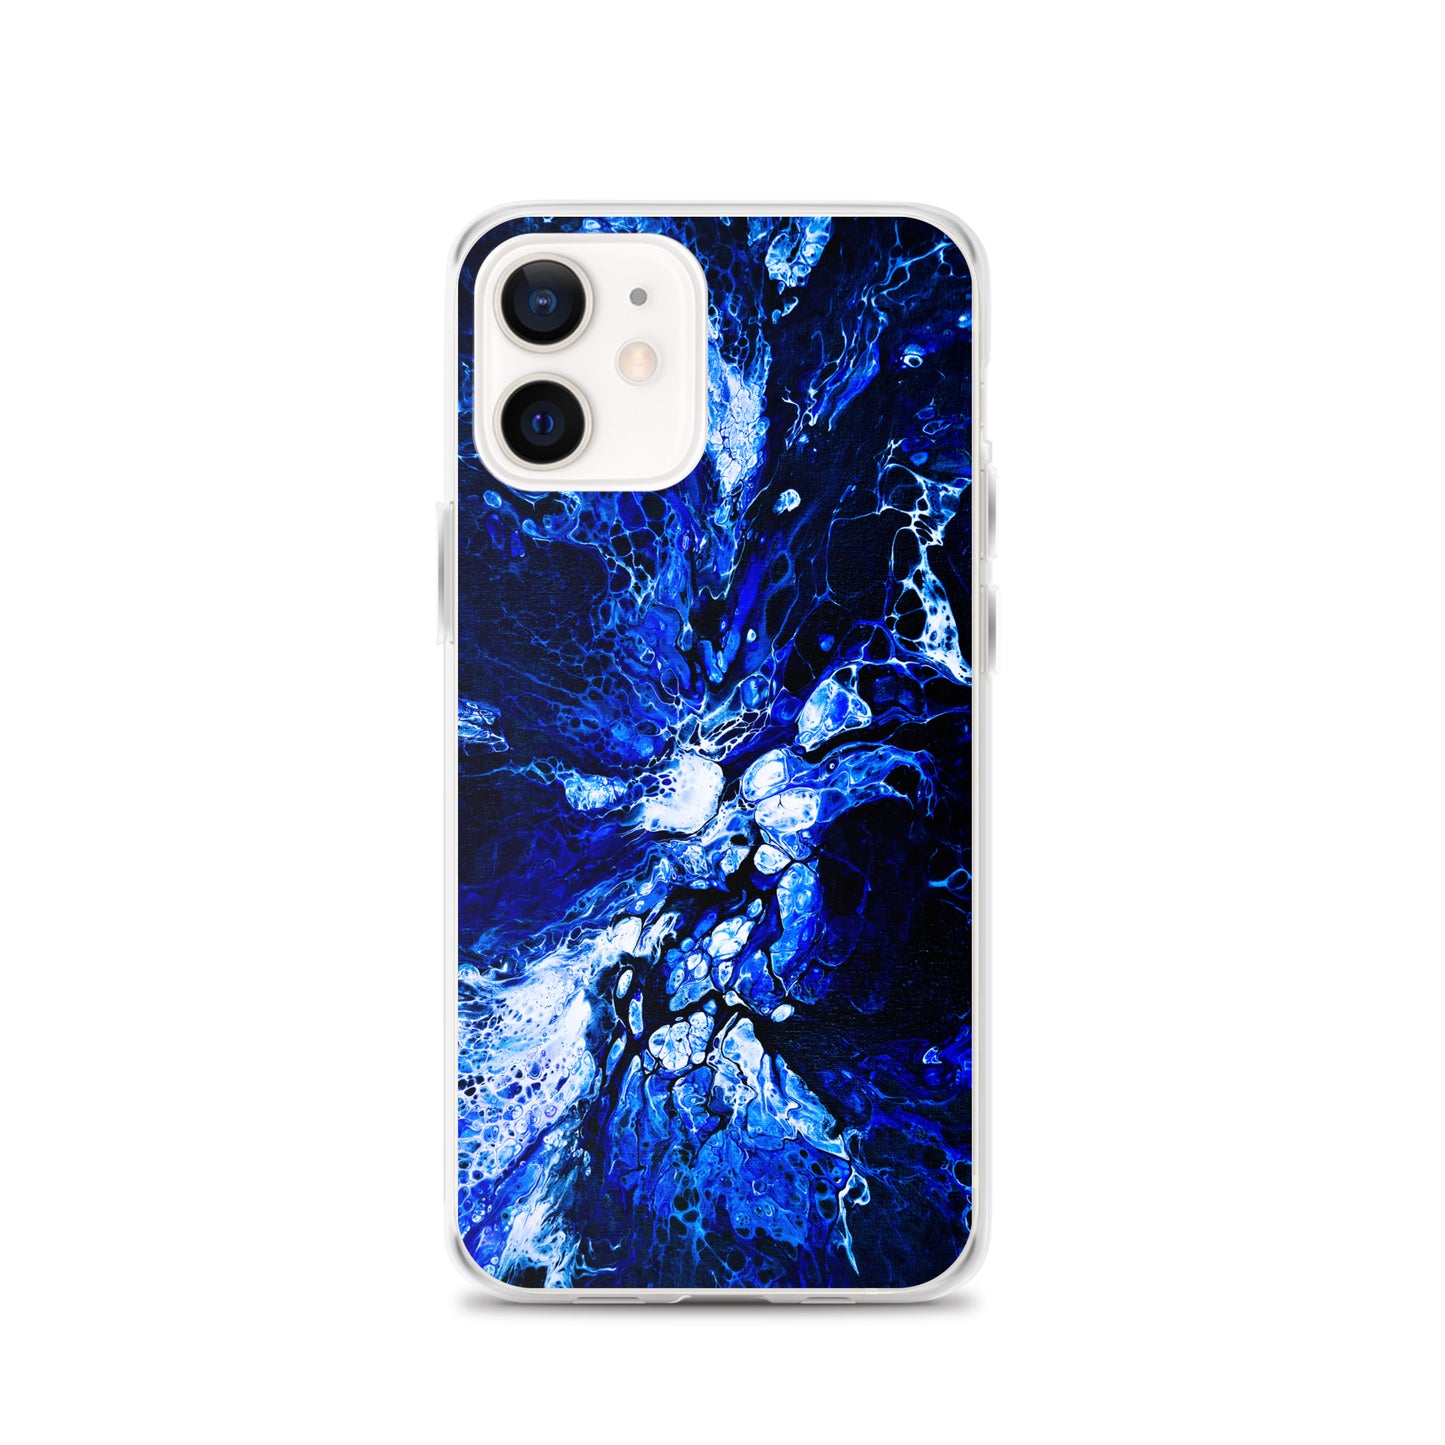 NightOwl Studio Custom Phone Case Compatible with iPhone, Ultra Slim Cover with Heavy Duty Scratch Resistant Shockproof Protection, Blue Burst